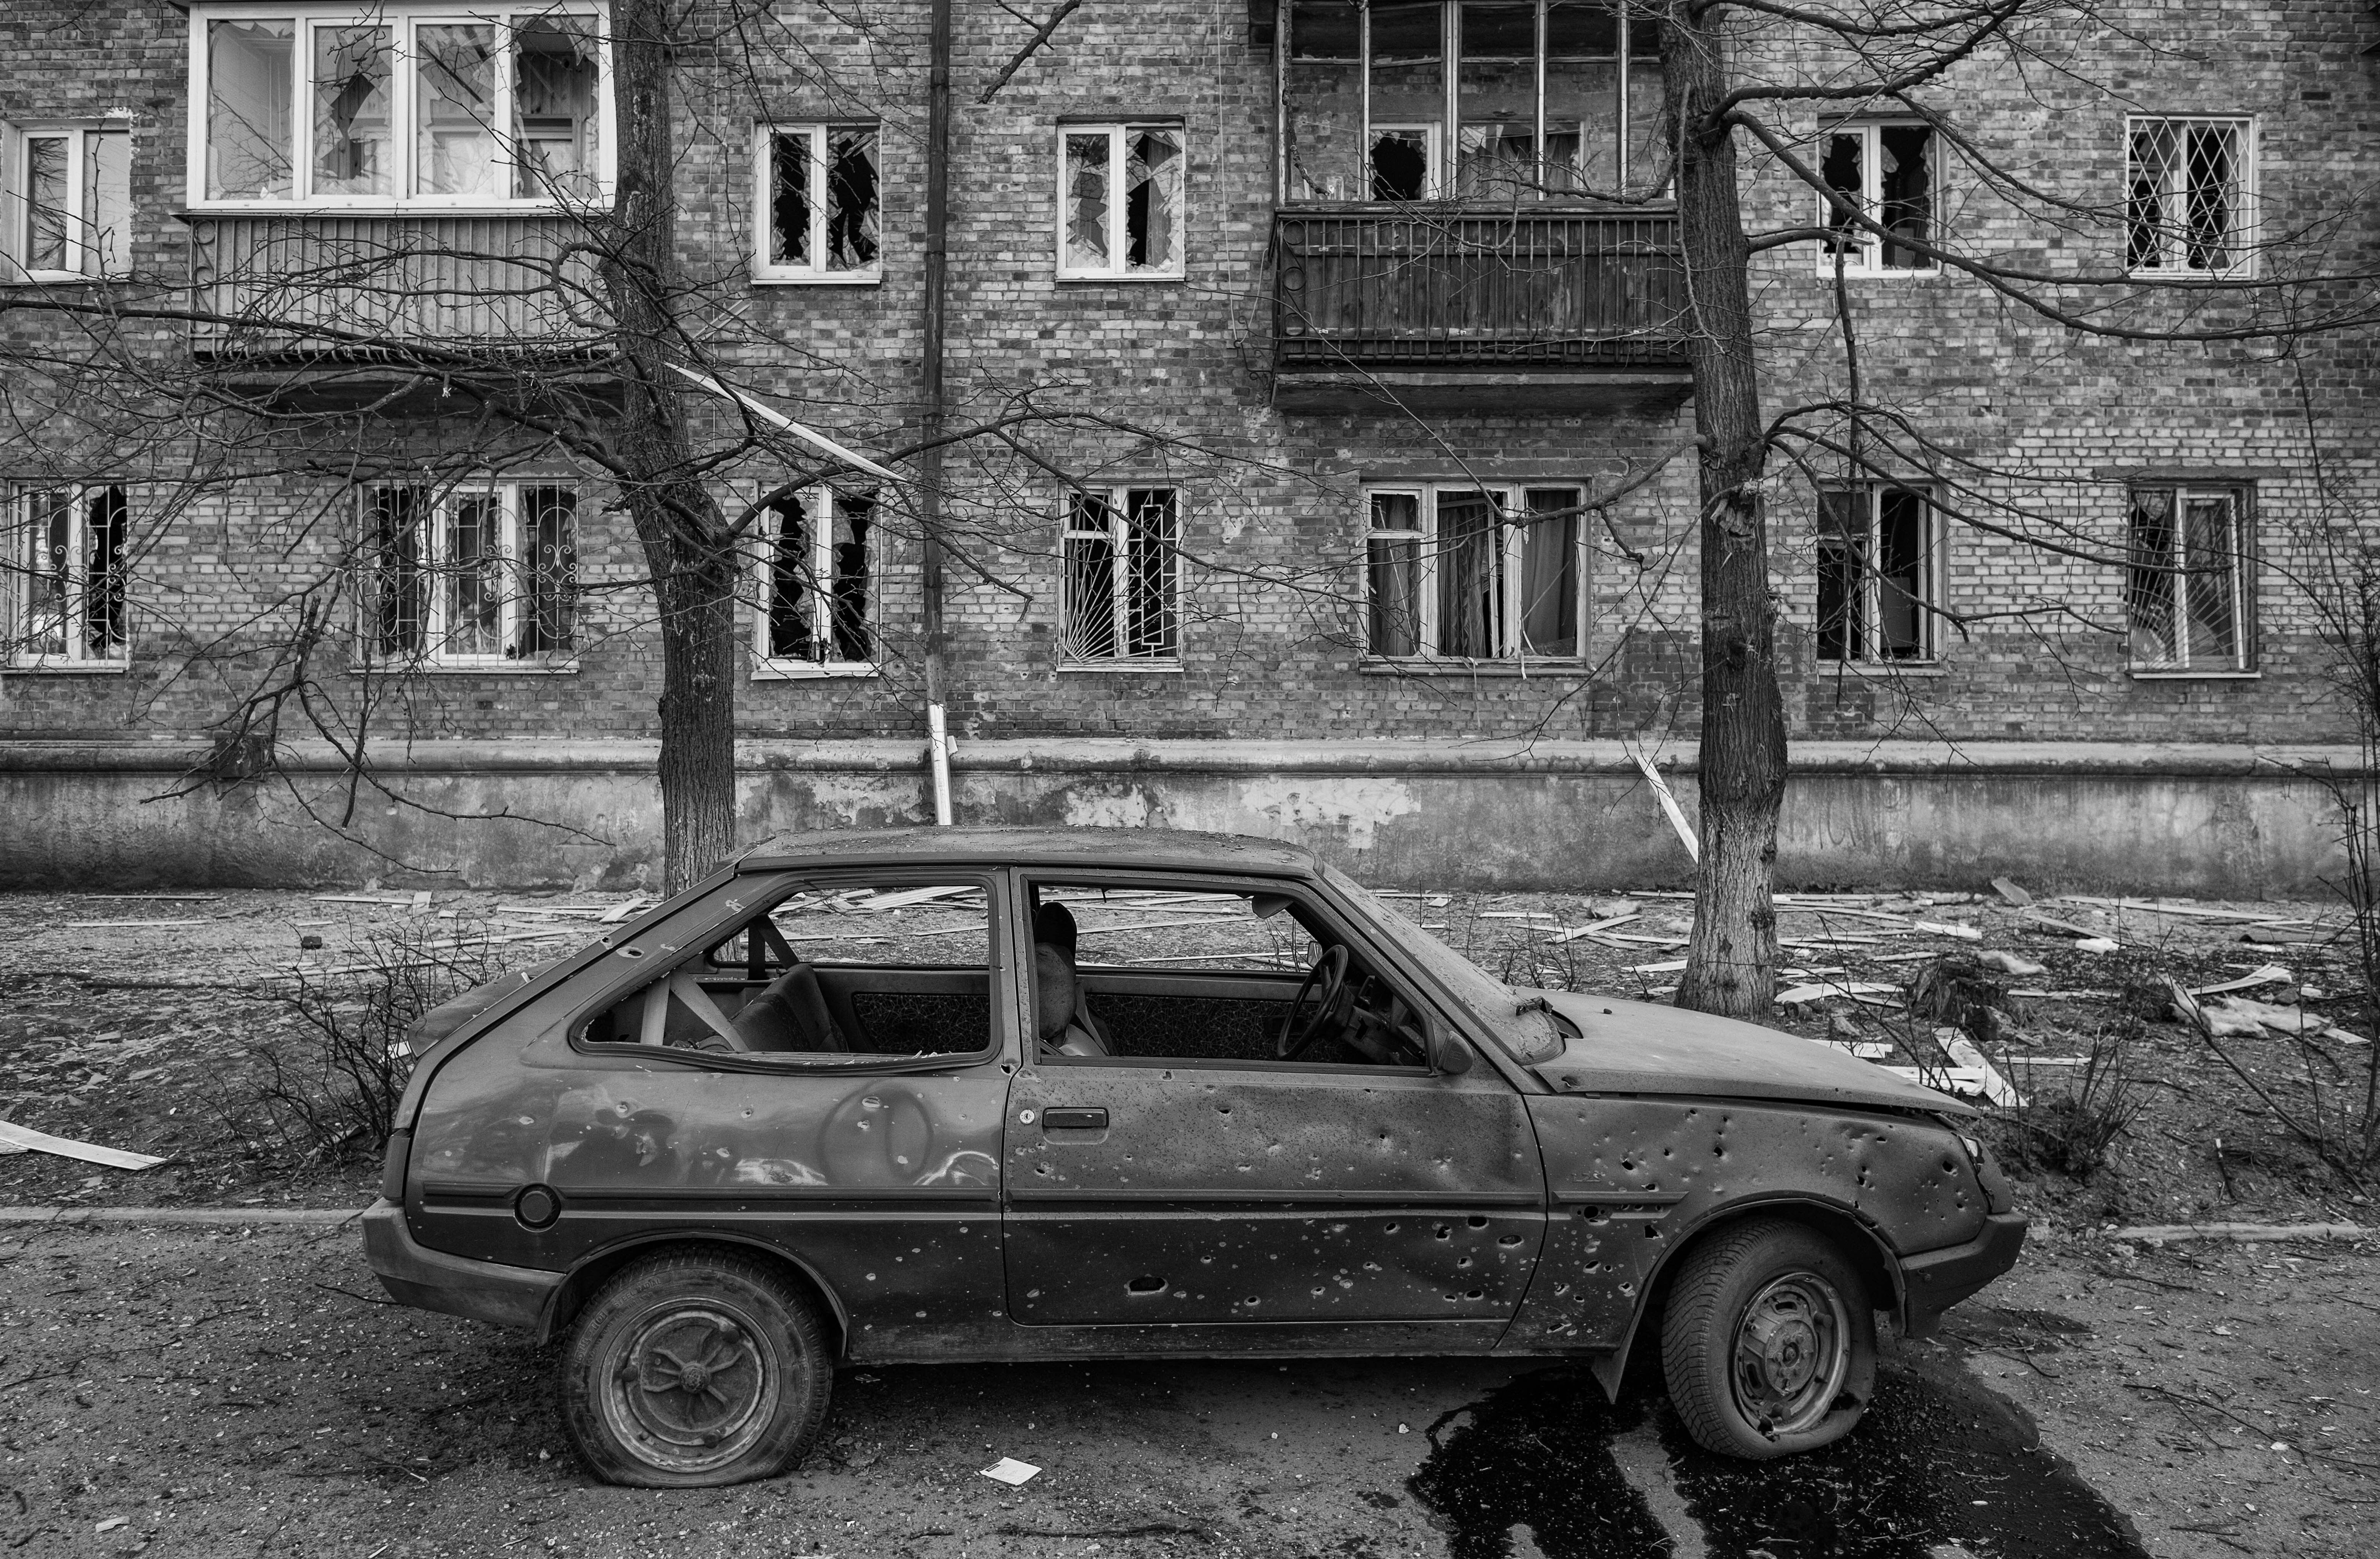 A vehicle in Kyiv is damaged in a residential area after the area was targeted by Russian rockets.